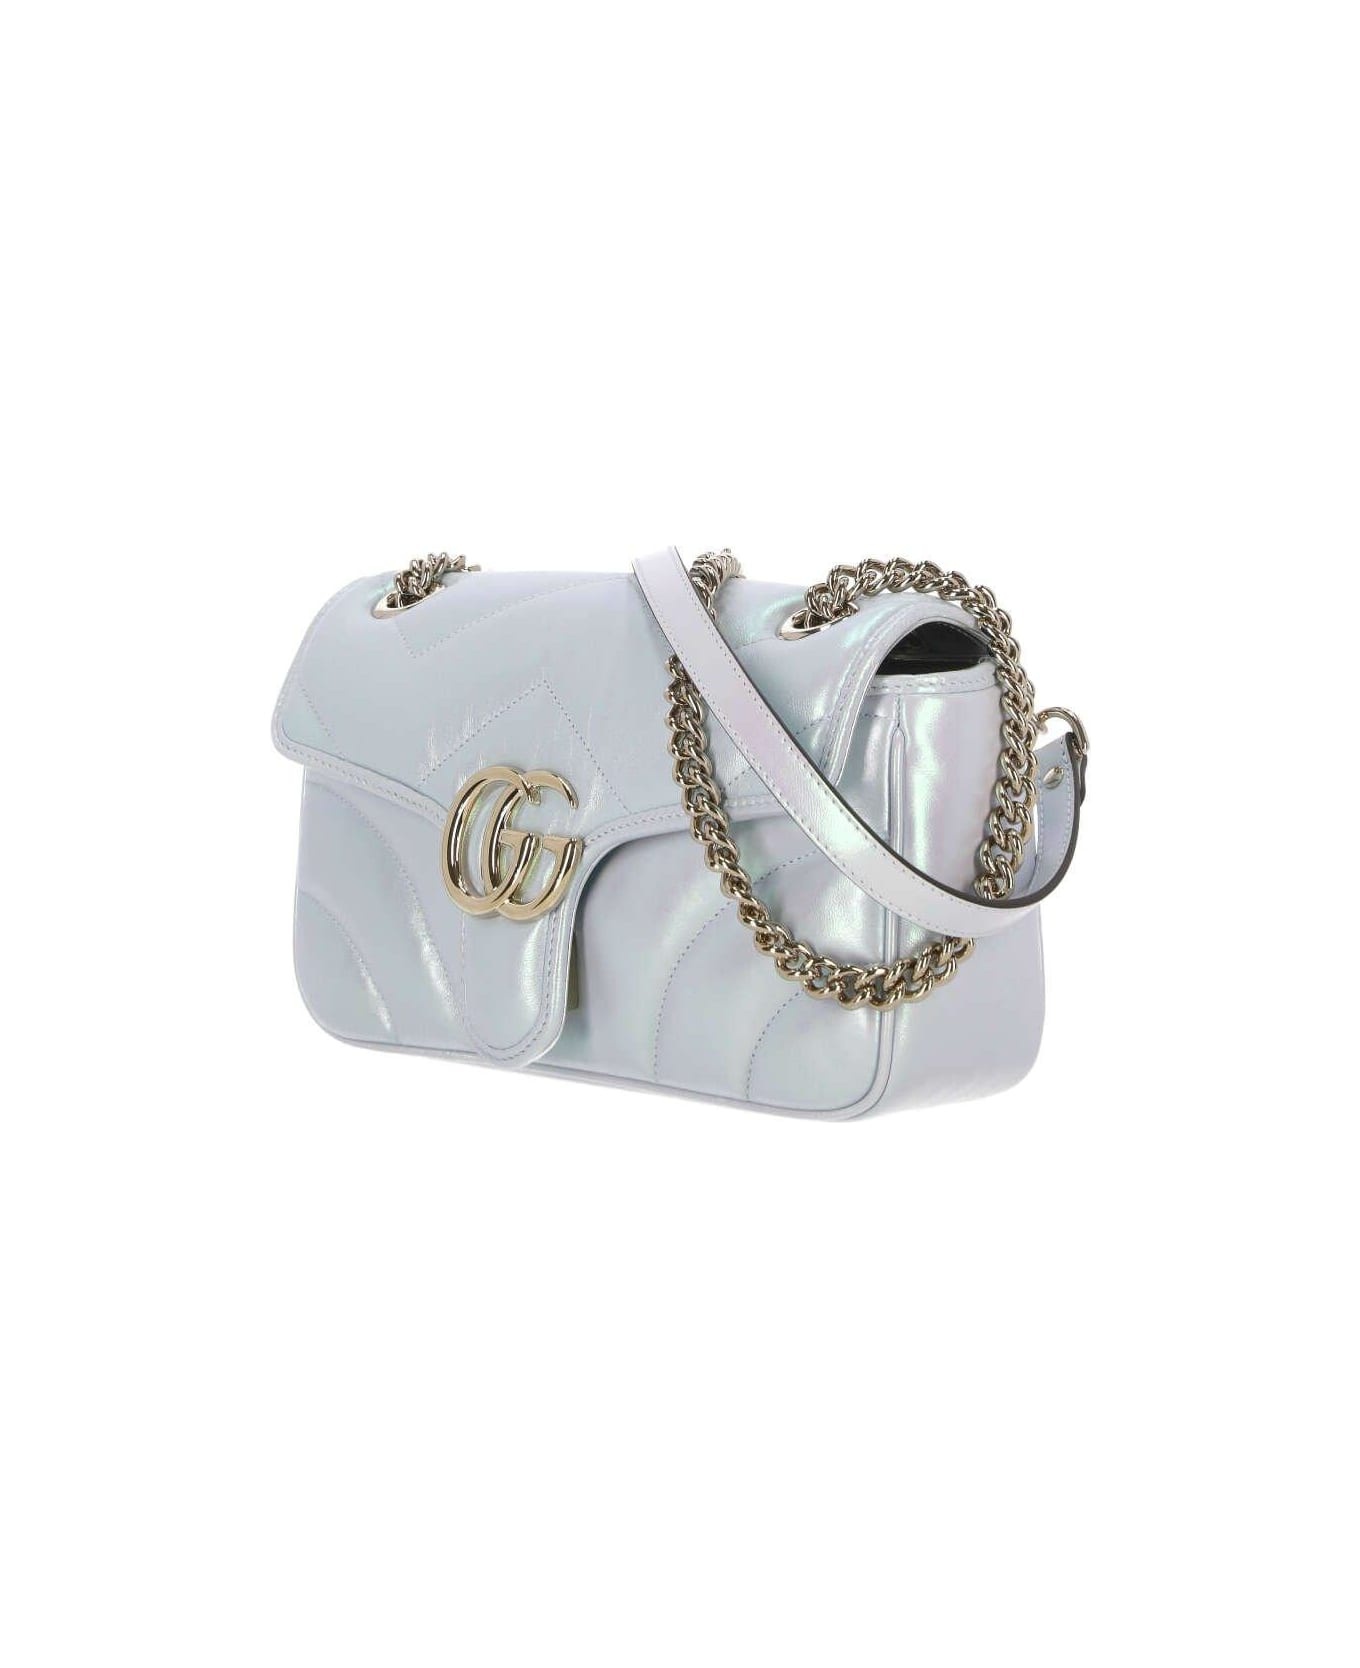 Gg Marmont Small Shoulder Bag - 3